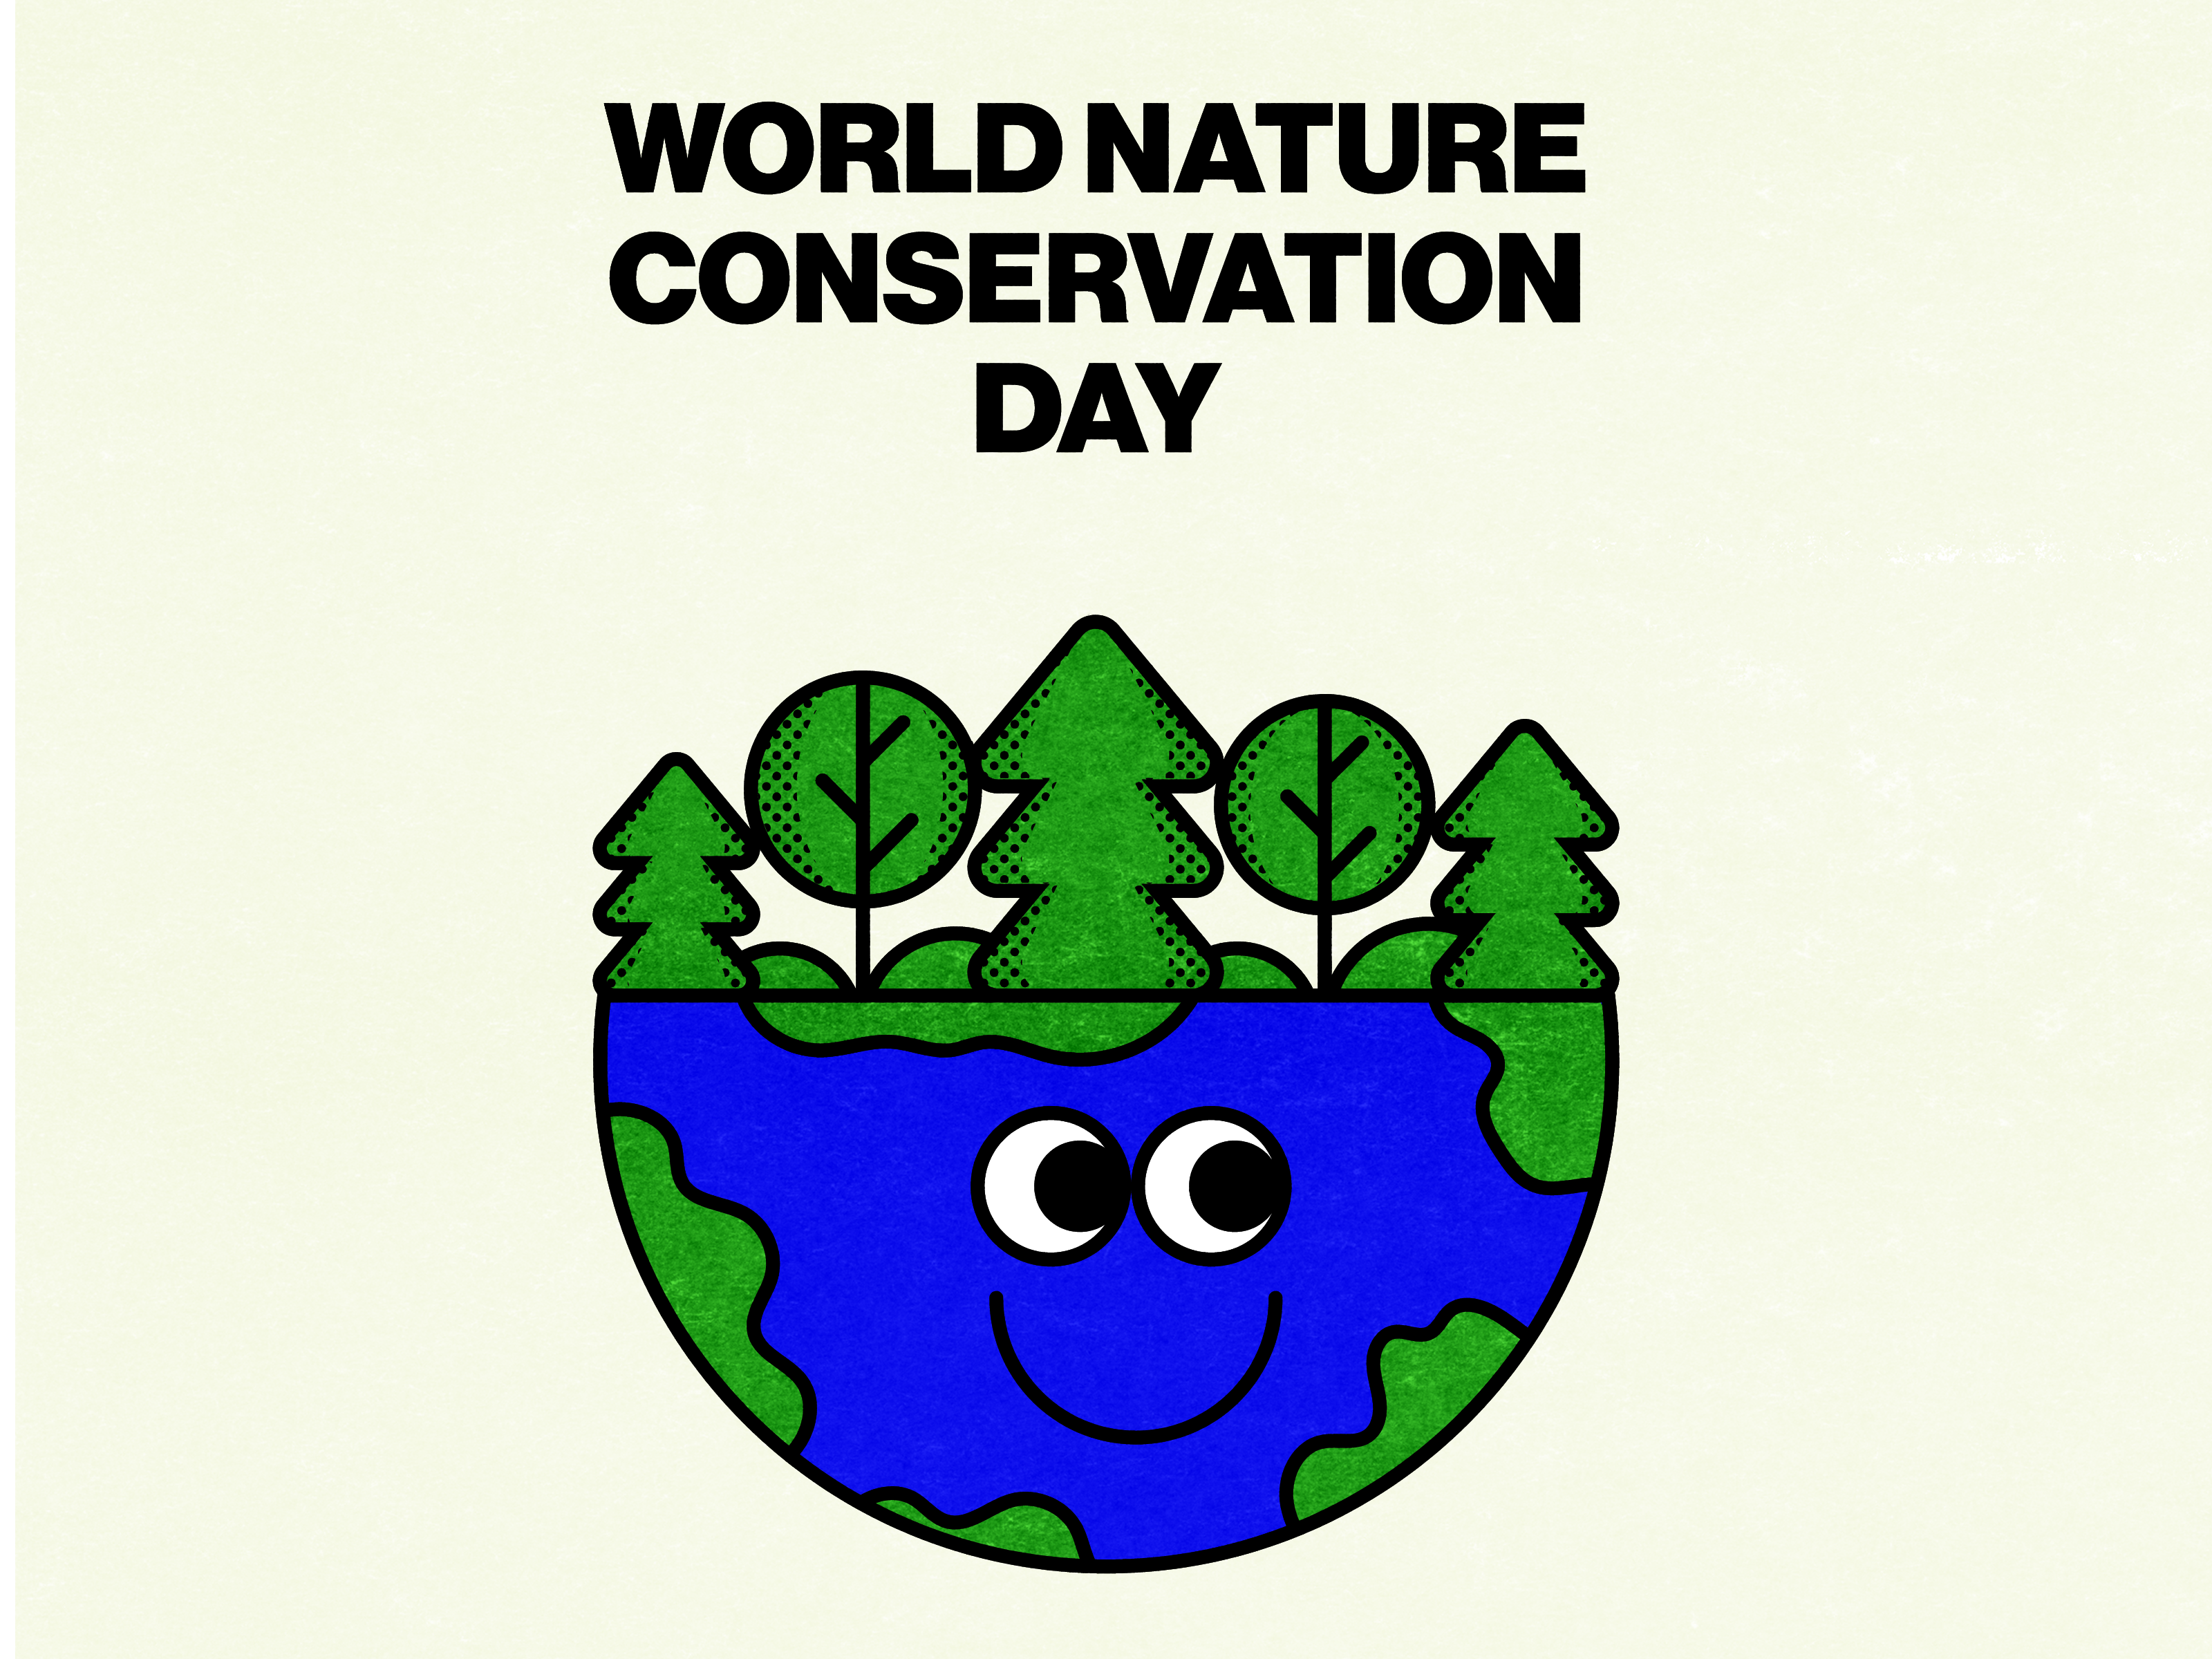 World Nature Conservation Day Drawing | World Nature Conservation Special  Drawing - YouTube